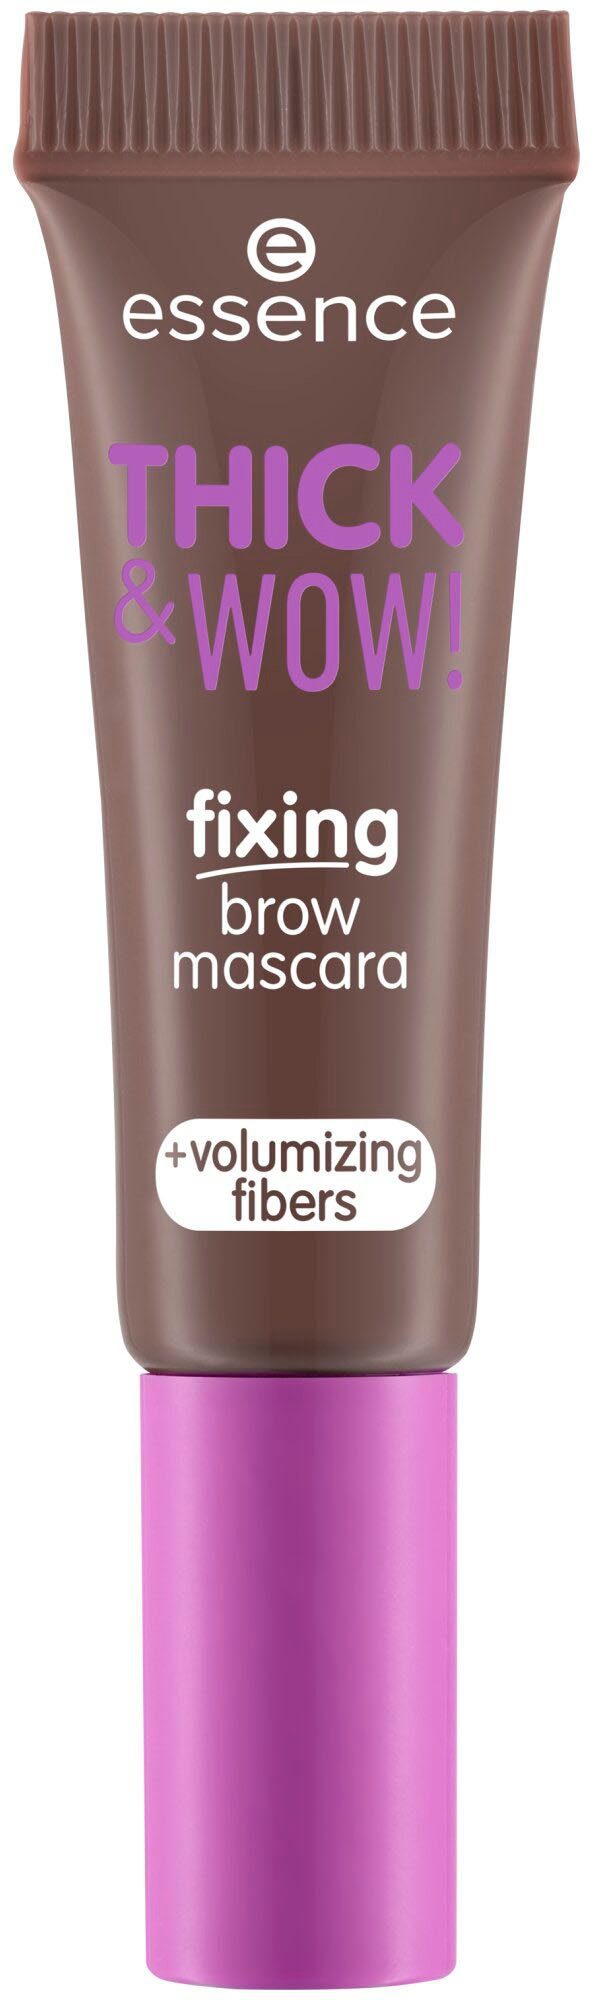 Essence Augenbrauen-Gel THICK Brown 3-tlg. WOW! brow & mascara, Ash fixing